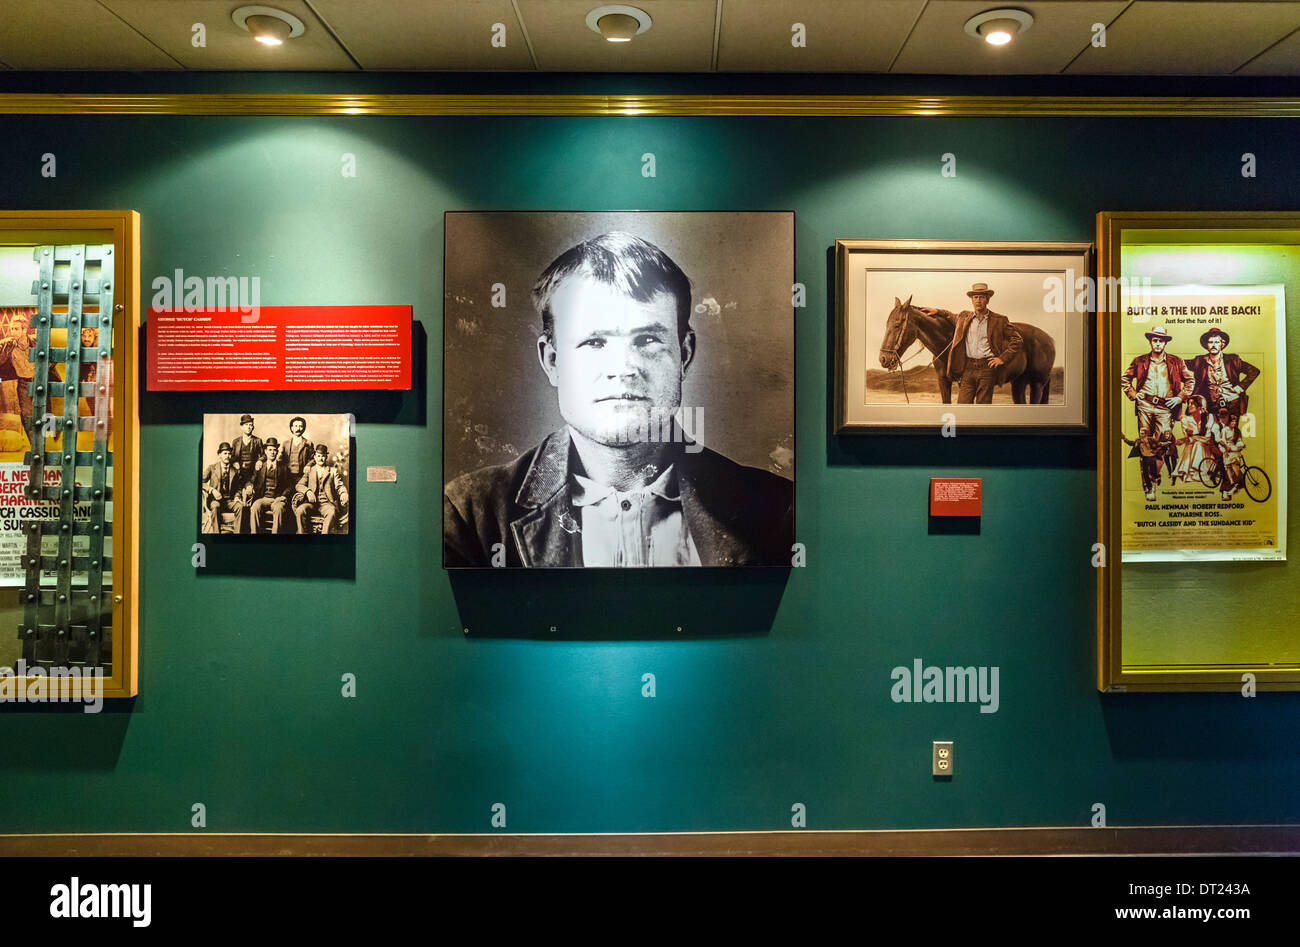 Butch Cassidy and the Sundance Kid display in Wyoming Territorial Prison Museum, Laramie, Wyoming, USA Stock Photo